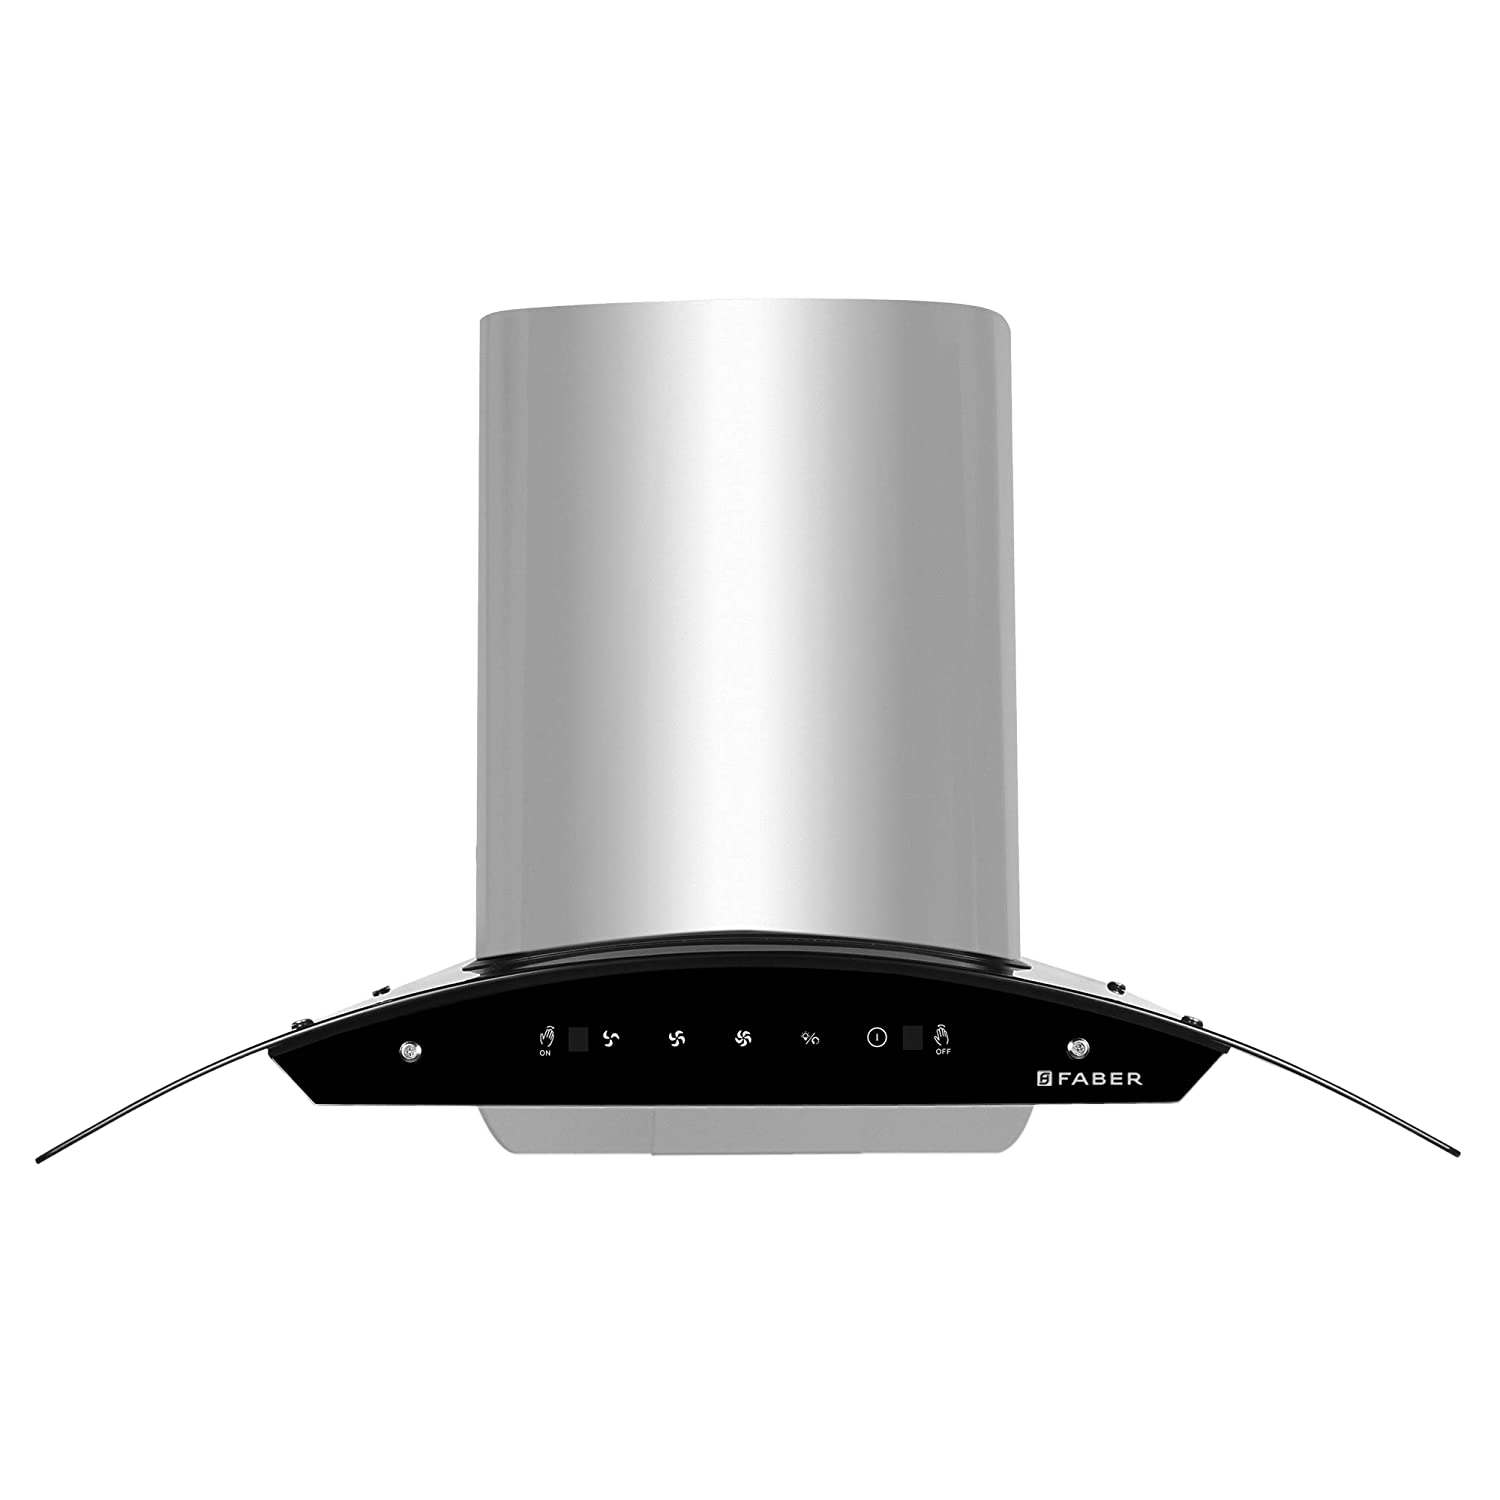 Faber Hood Orient Xpress HC SC SS 90 1200m³/hr 90 cm Wall Mounted Chimney (325.0638.044, Black and Stainless Steel)_1